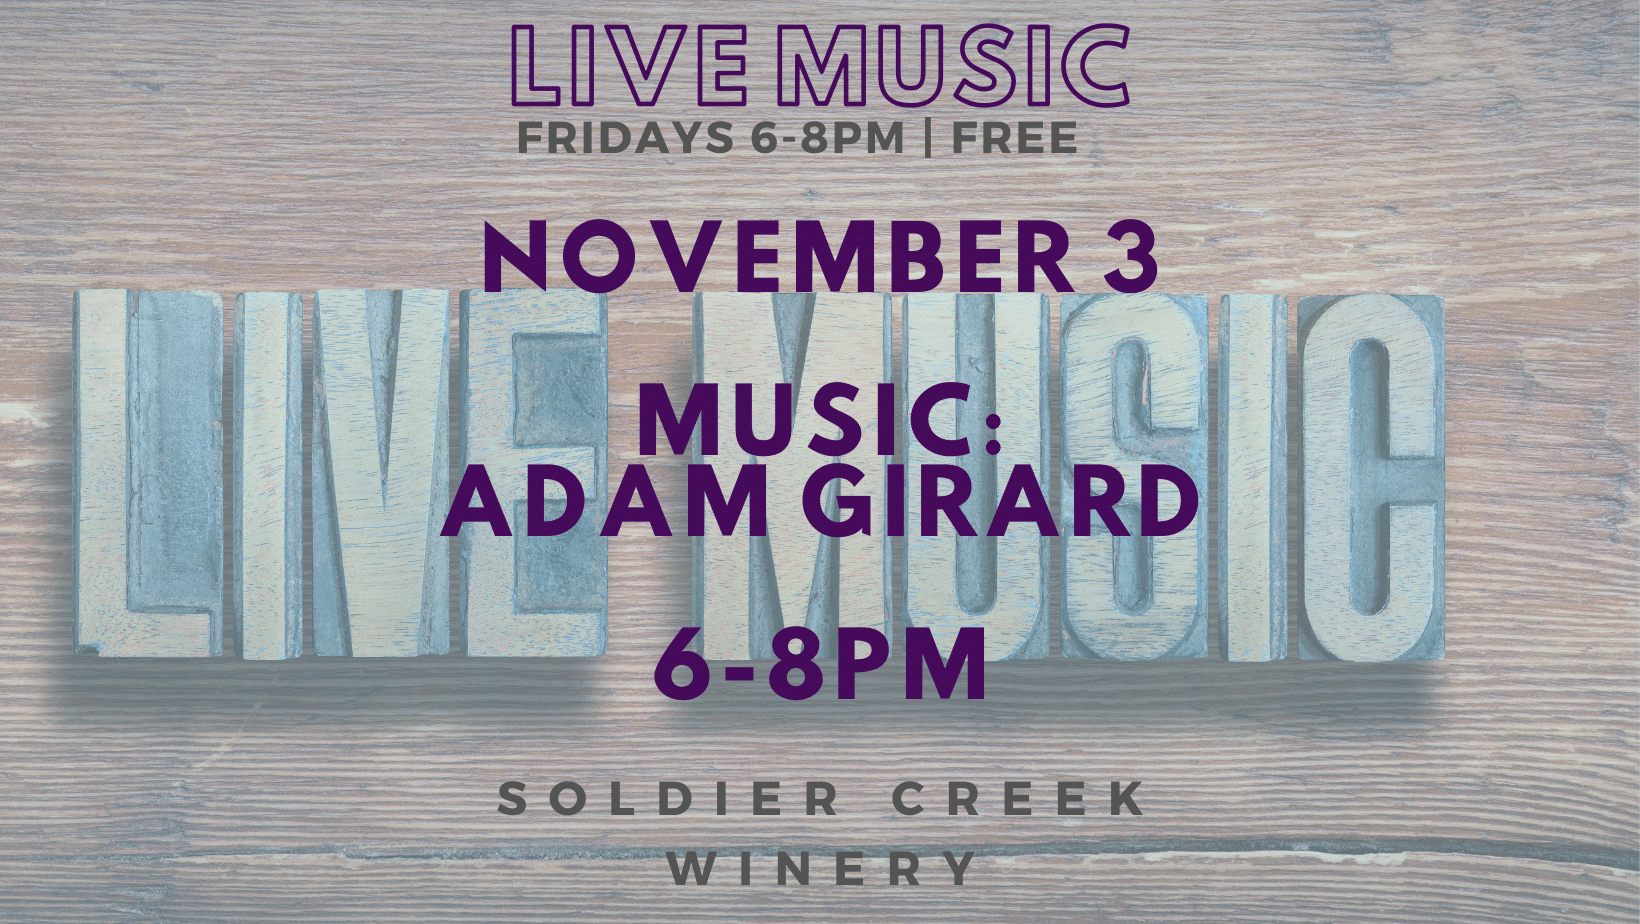 live music at soldier creek winery every friday, november 3 is adam girard from 6-8pm. free to listen!